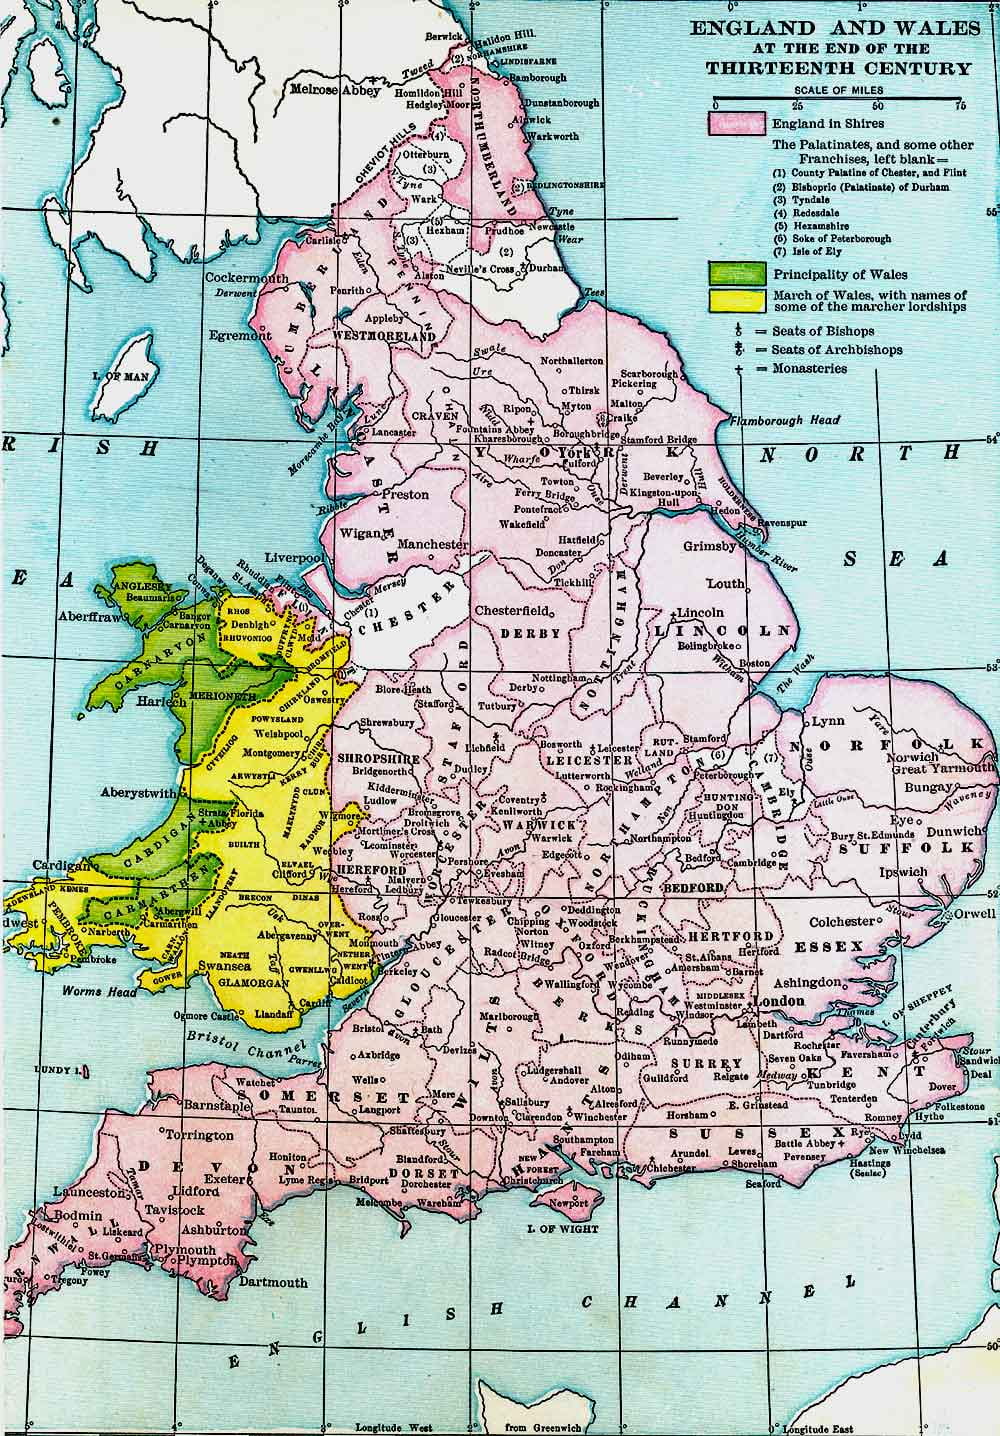 England and Wales at the End of the Thirteenth Century